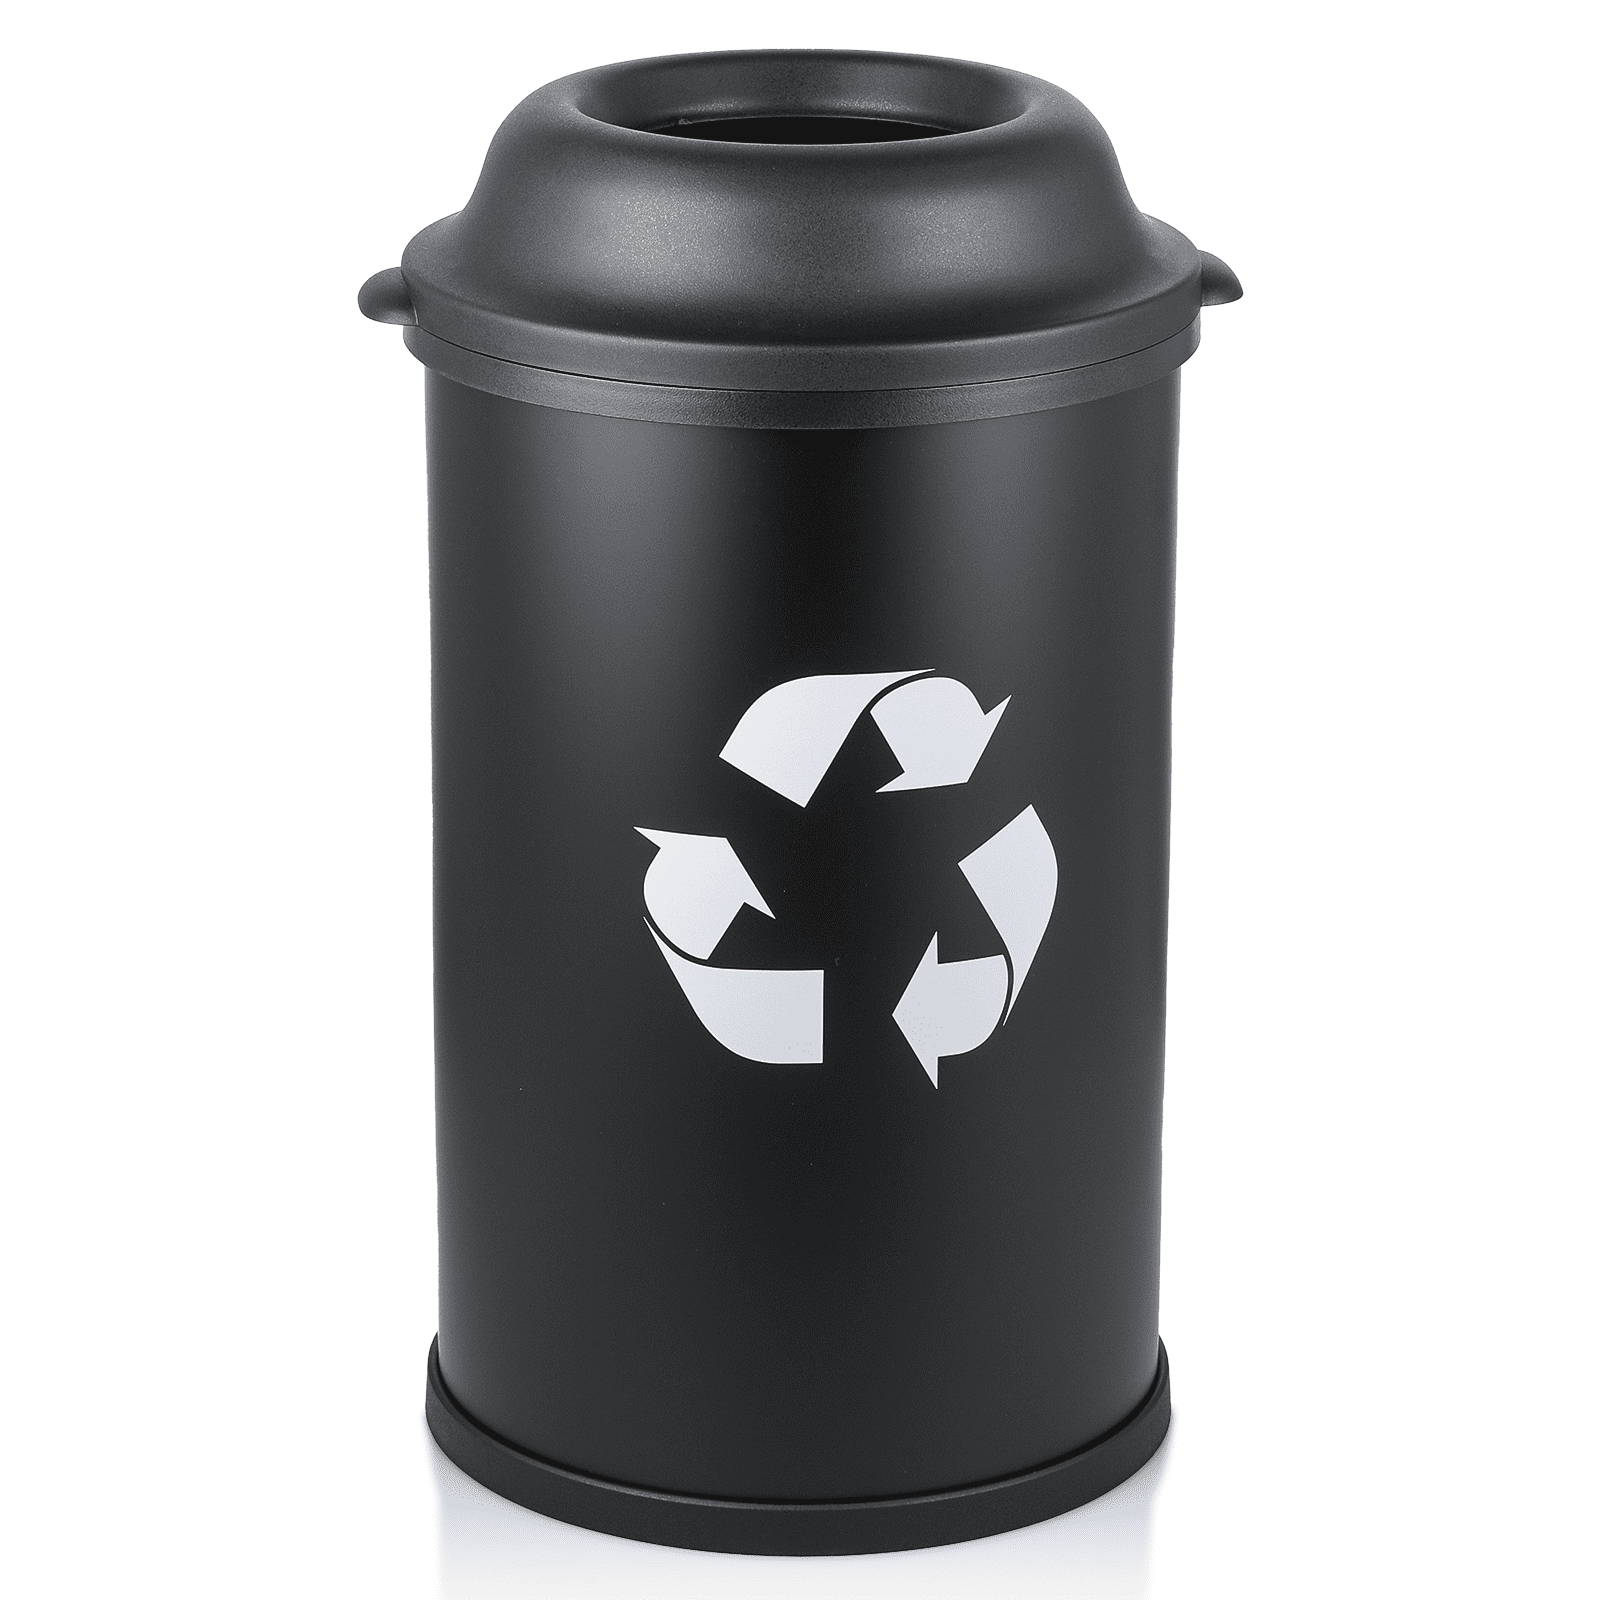 Magshion 13 Gallon Open Top Trash Can, Recycle Bin with Double Handles ...